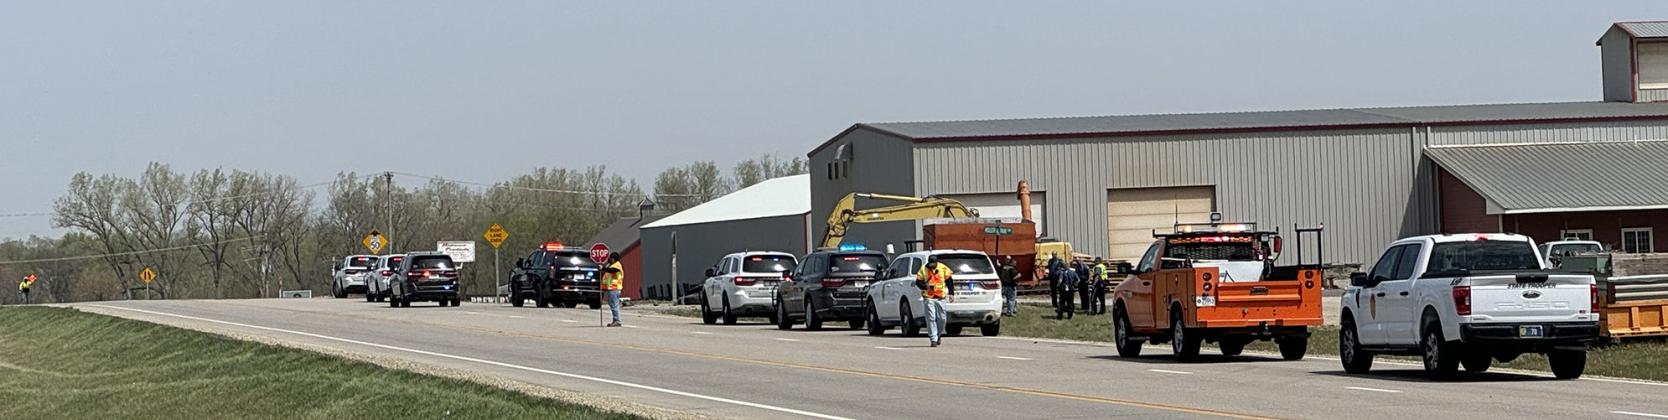 Several law enforcement agencies and other departments responded to the crash site on Monday morning, where traffic was put into a one-lane controlled situation for a while.